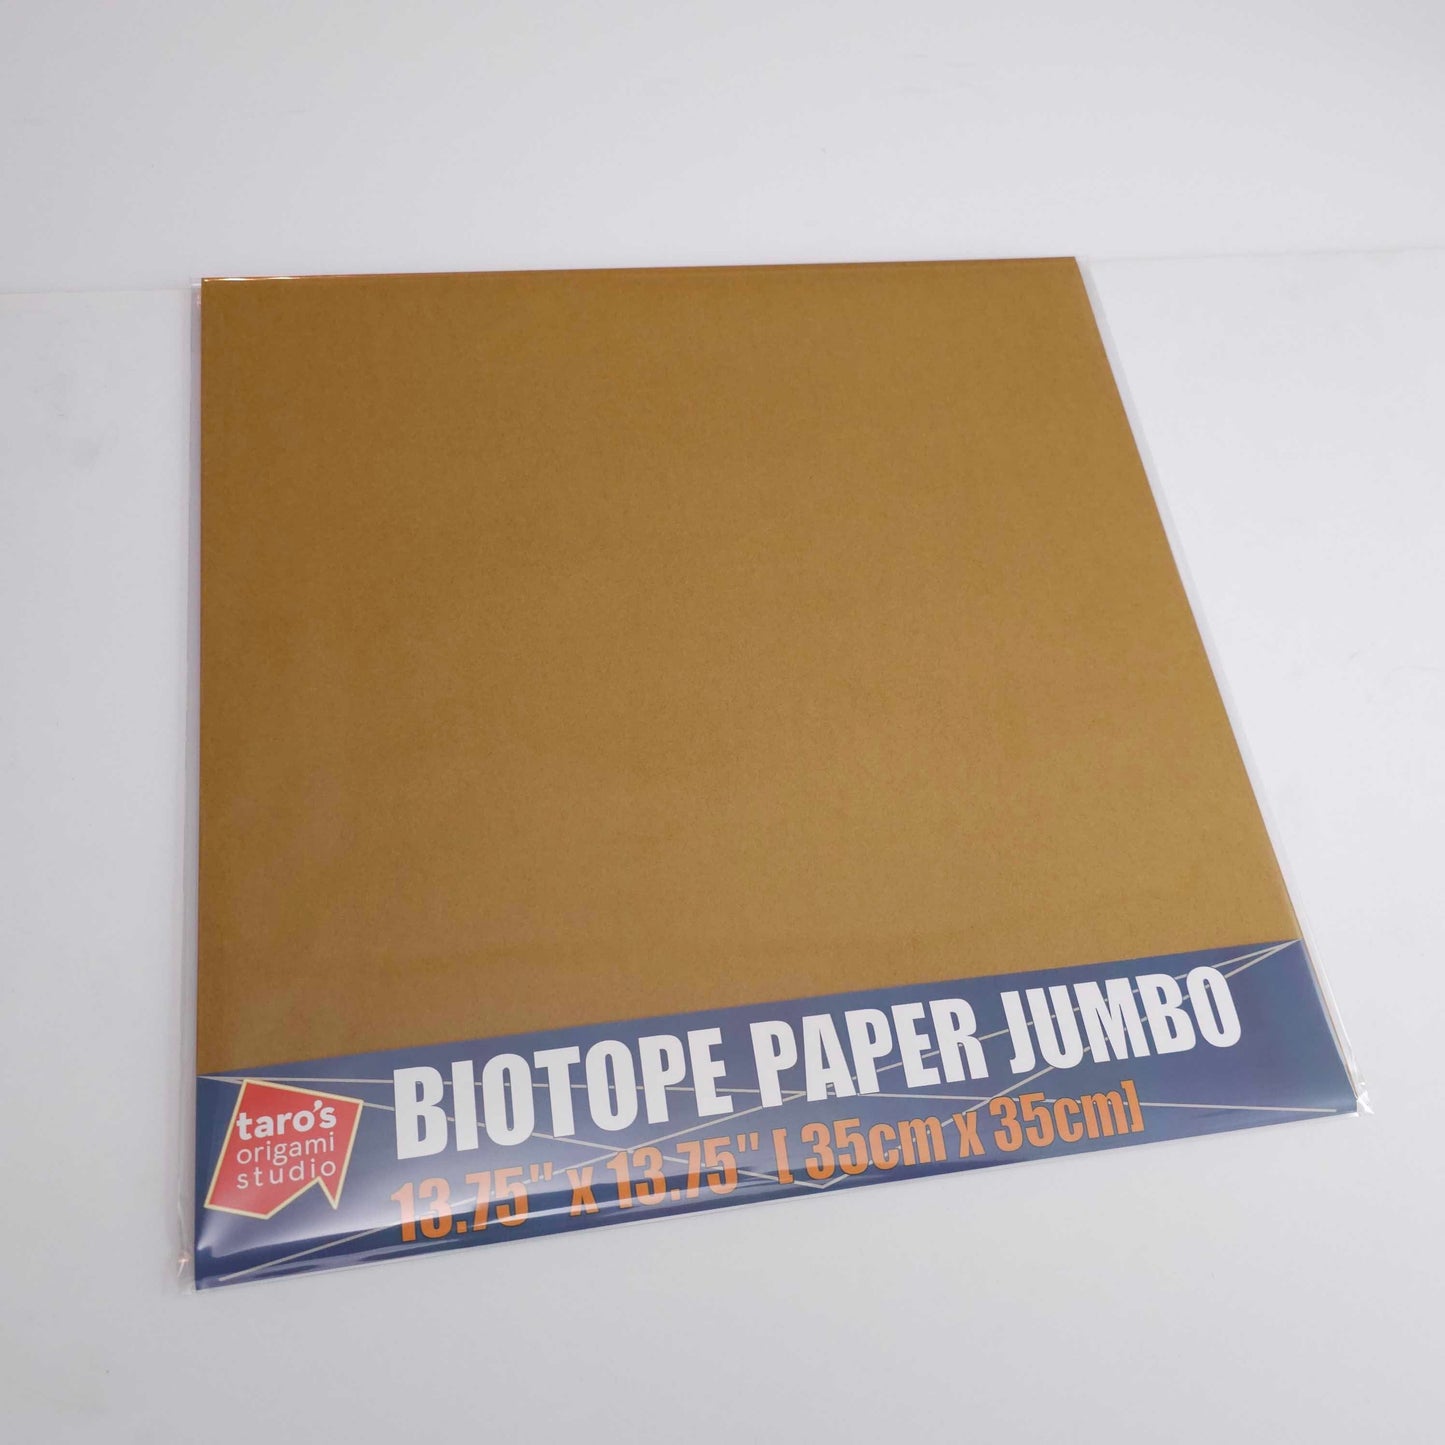 [Taro's Origami Studio] Biotope Jumbo 13.75 Inch / 35cm Single Color (Yellow Ocher) 10 Sheets (All Same Color) Premium Japanese Paper for Advanced Folders (Made in Japan)